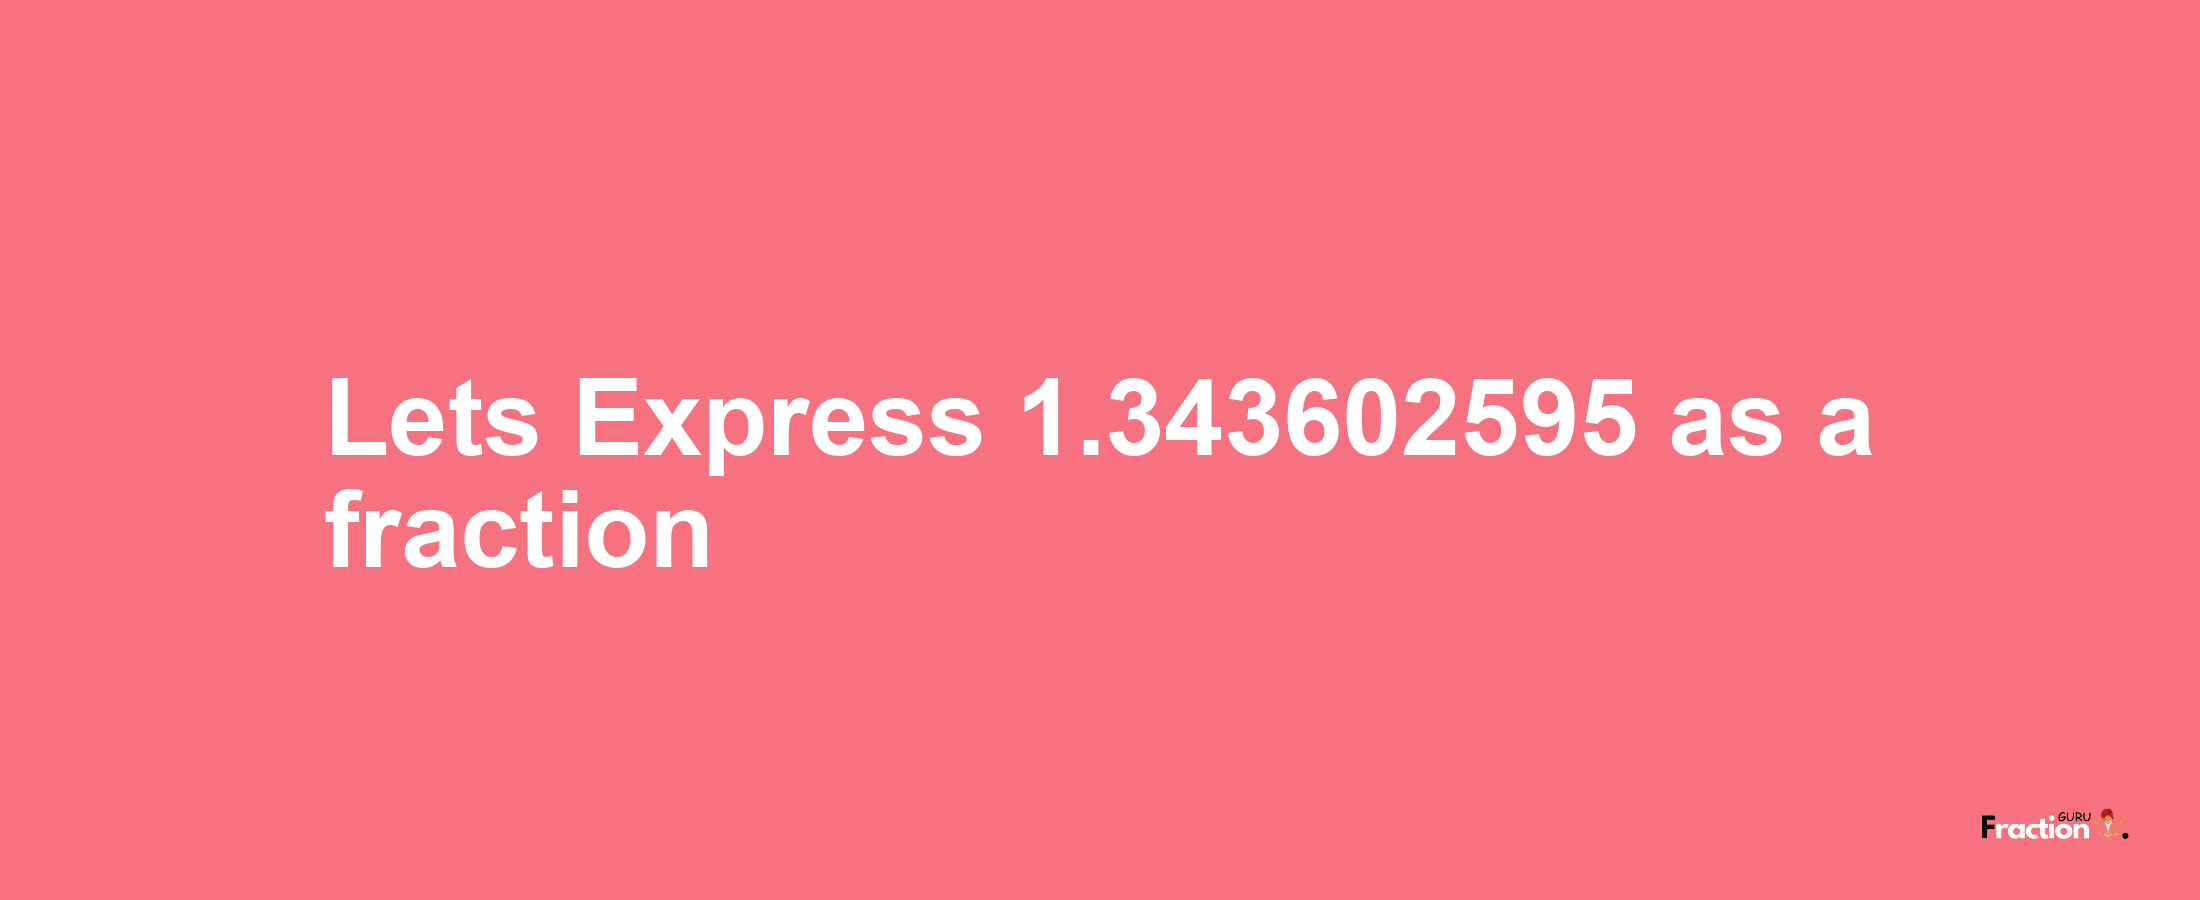 Lets Express 1.343602595 as afraction